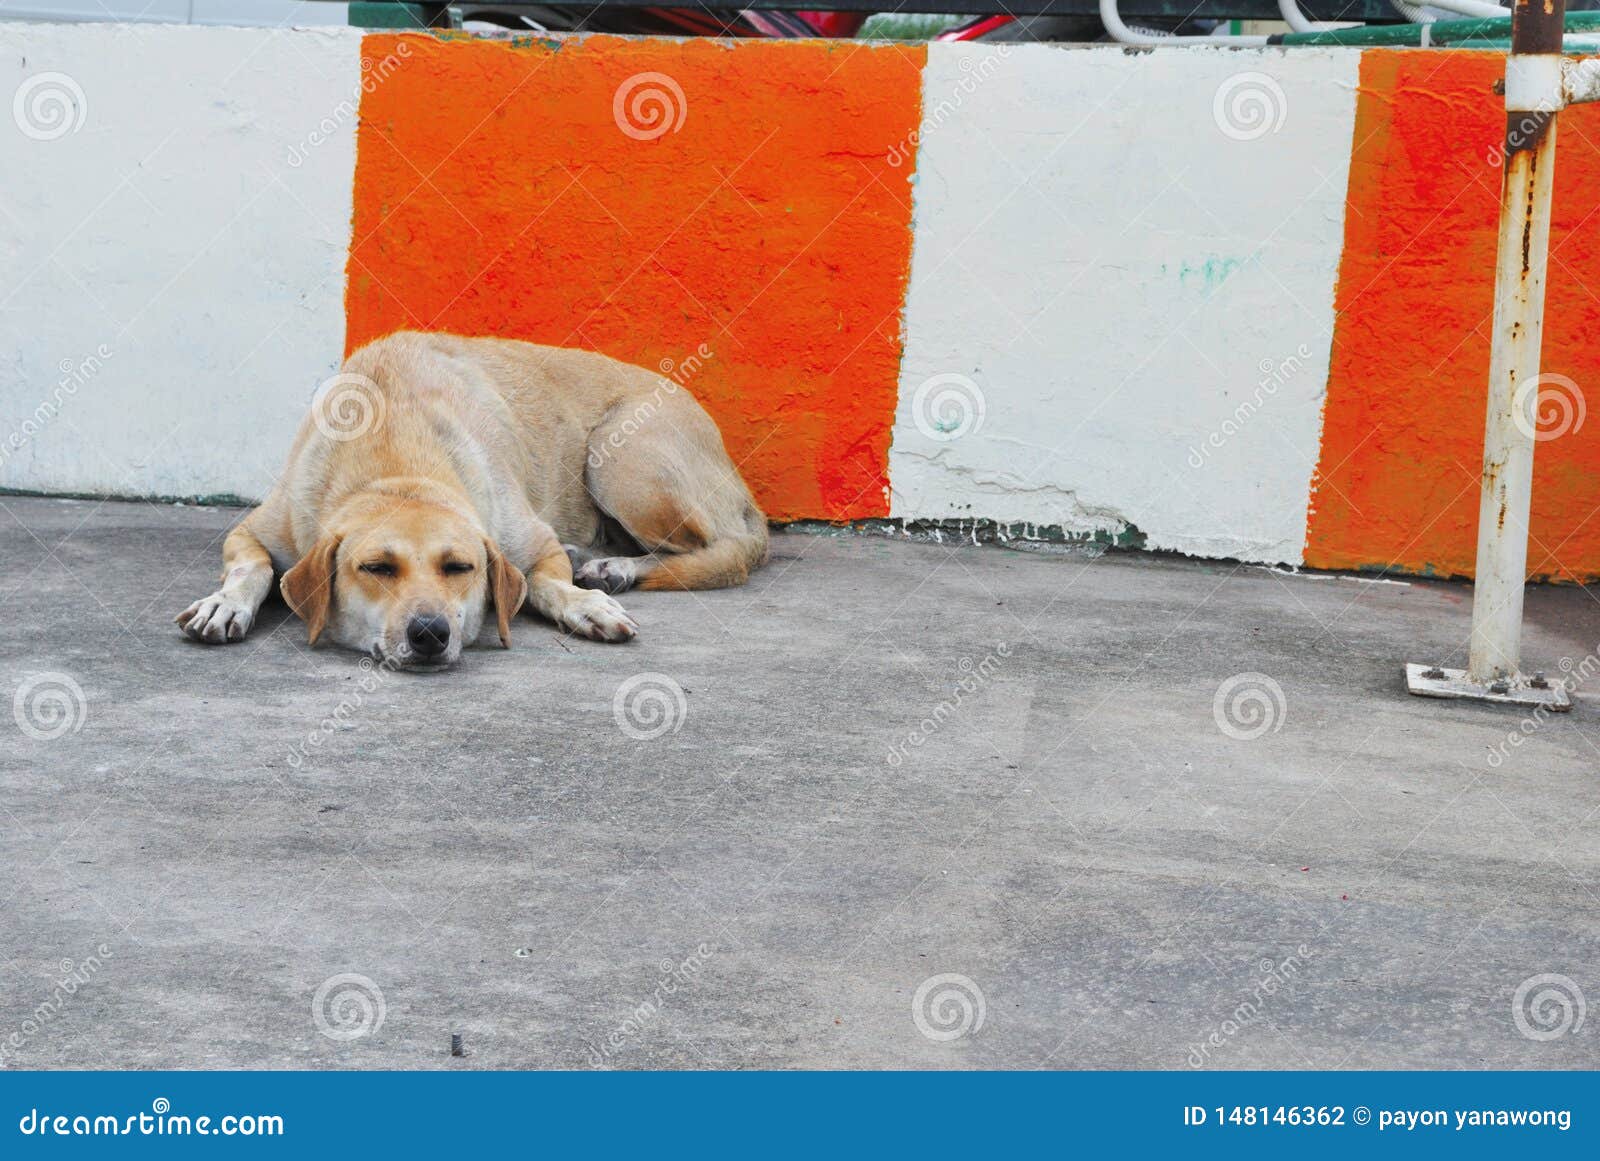 The Dog Lay Flat On The Floor Stock Photo Image of breed, ears 148146362